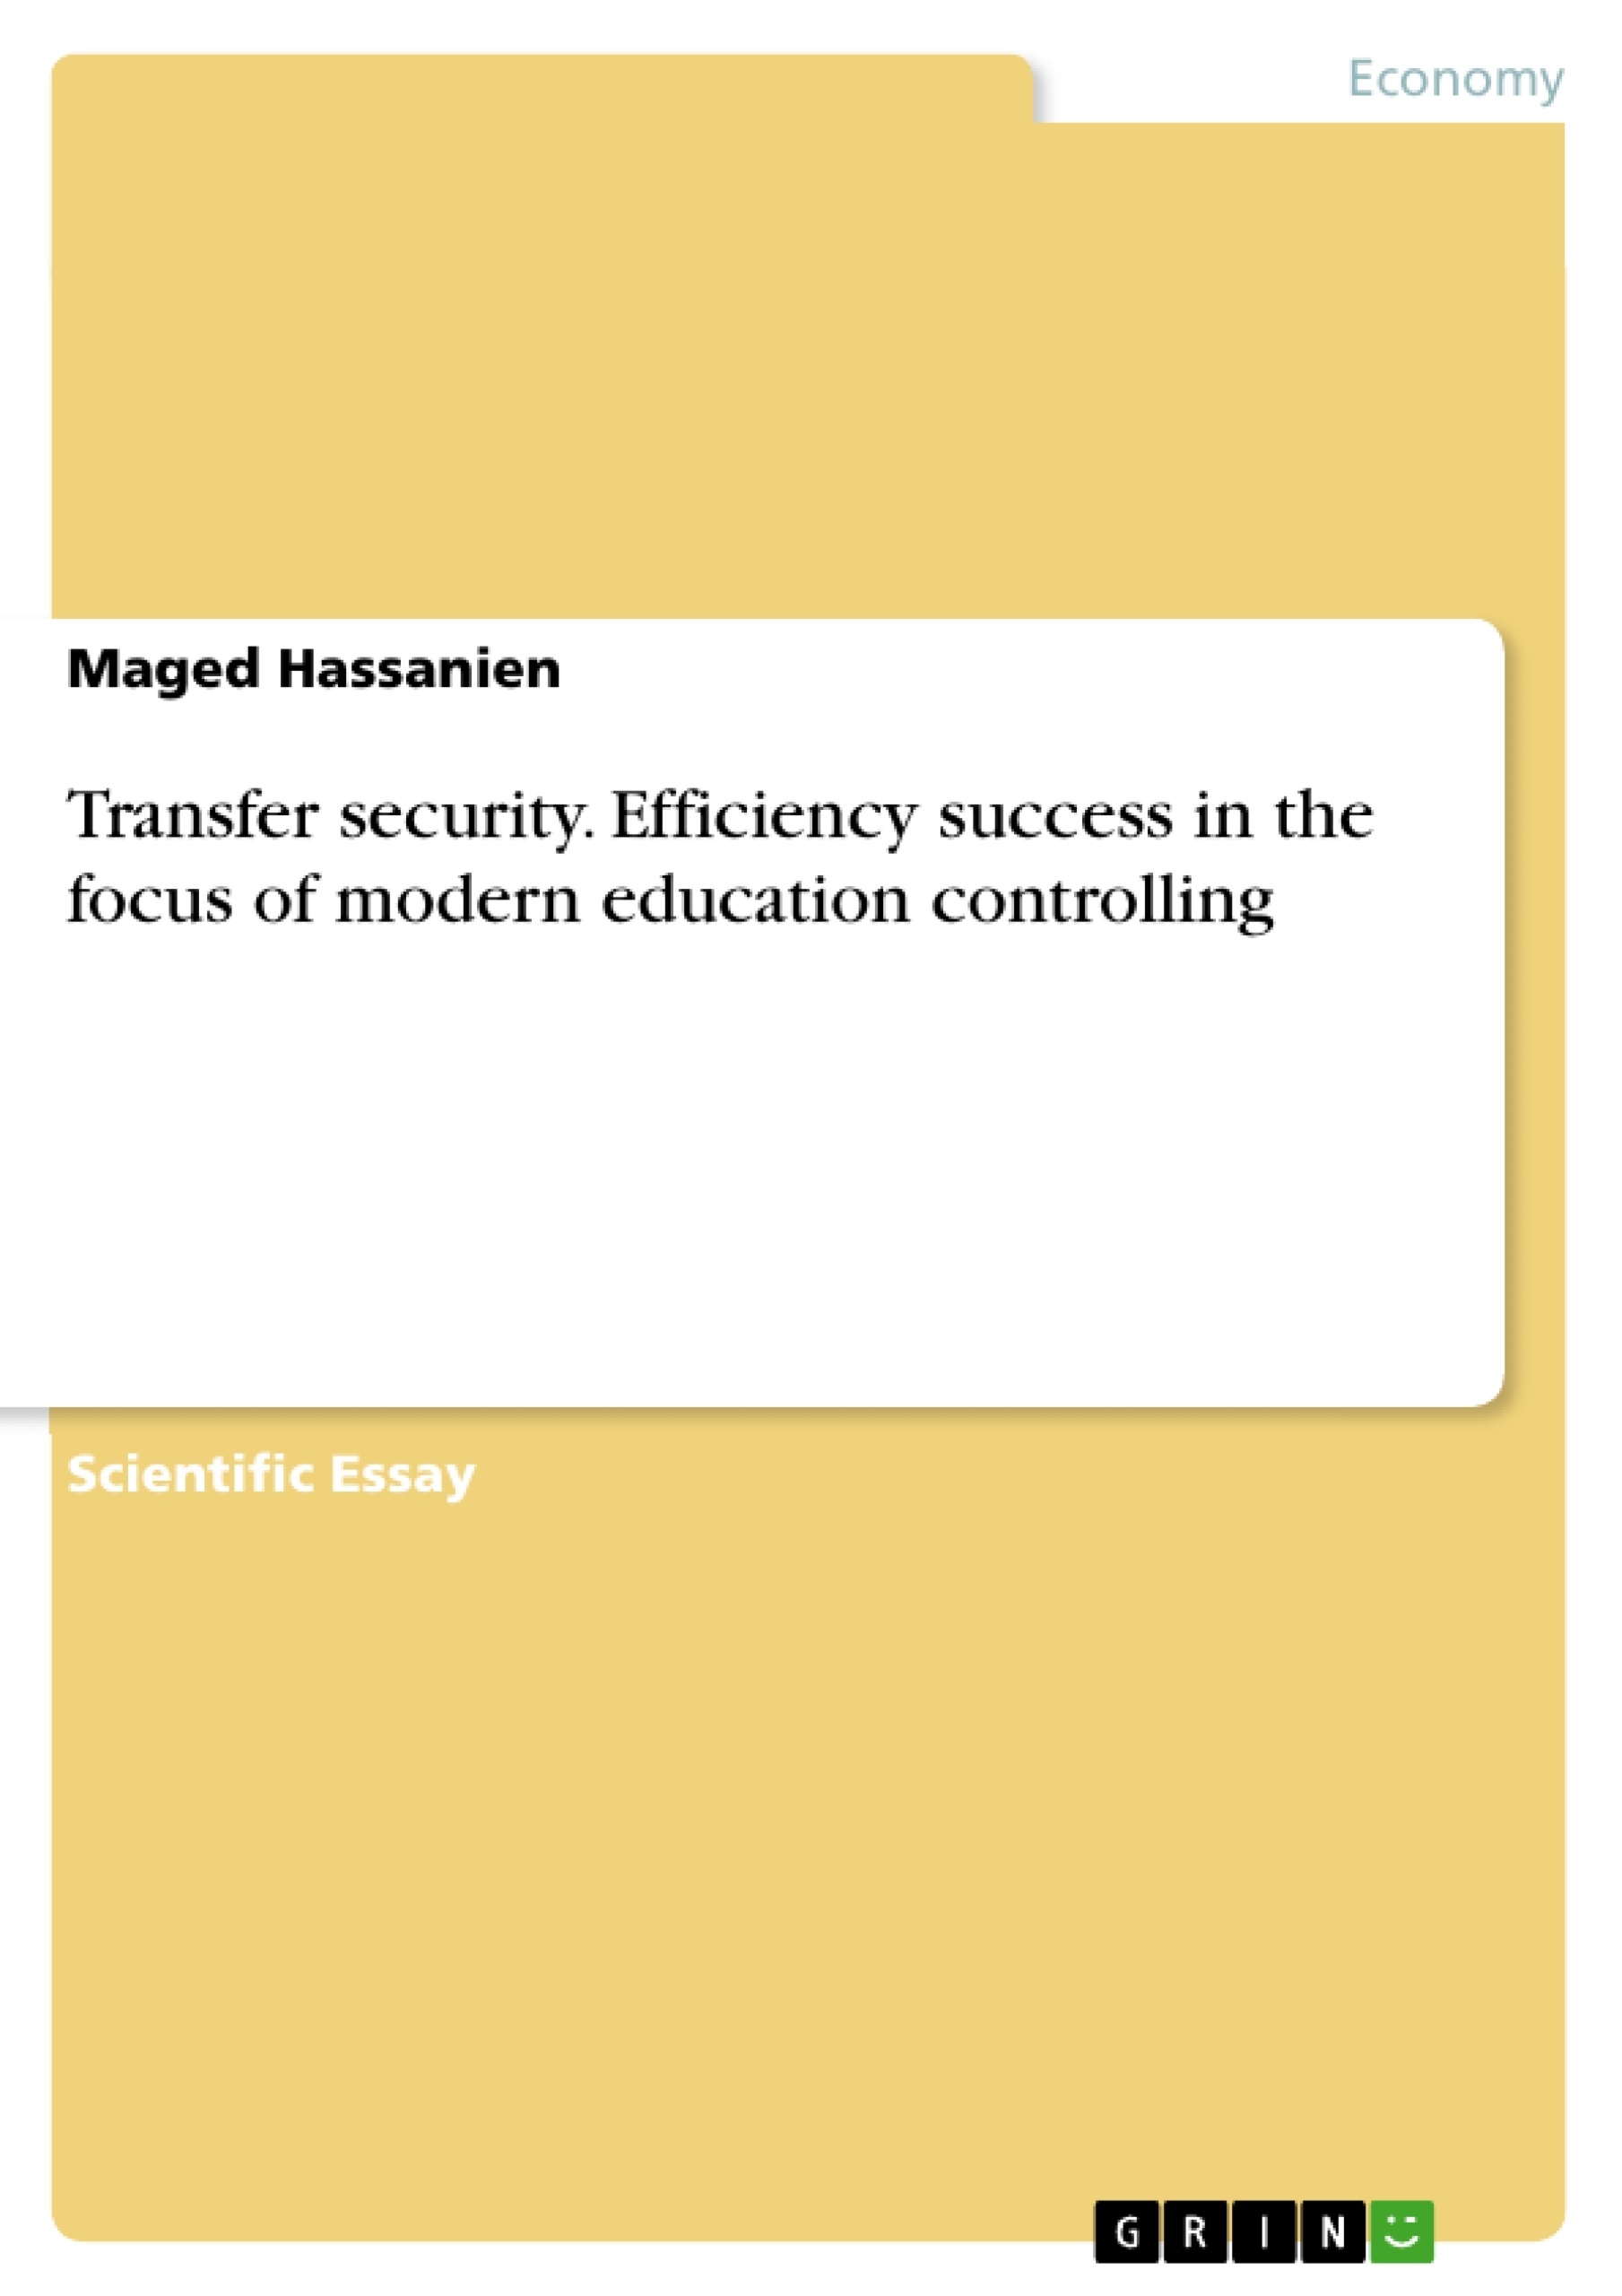 Title: Transfer security. Efficiency success in the focus of modern education controlling